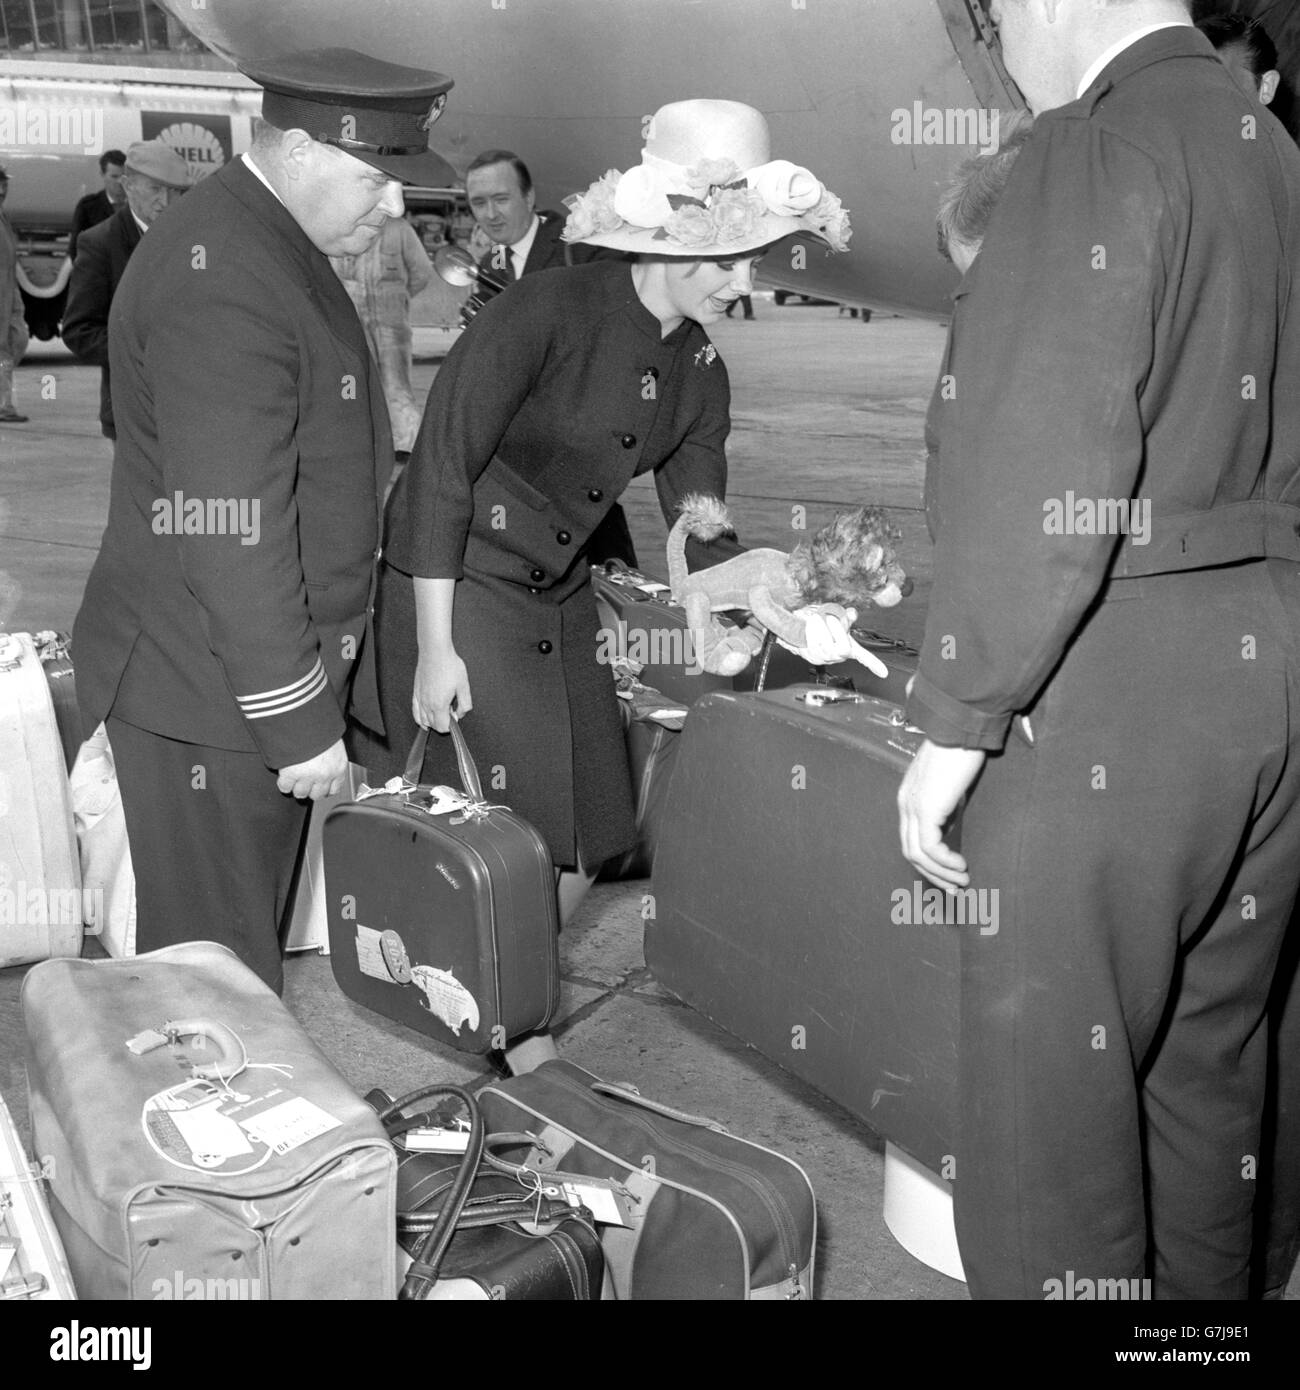 Marilyn (Mandy) Rice-Davies, 18-year-old witness in the Stephen Ward case, with her luggage at London Airport as she left for Palma, Majorca. Her flight was delayed, but when she eventually went to board the aircraft she was escorted by two airport policemen. Stock Photo